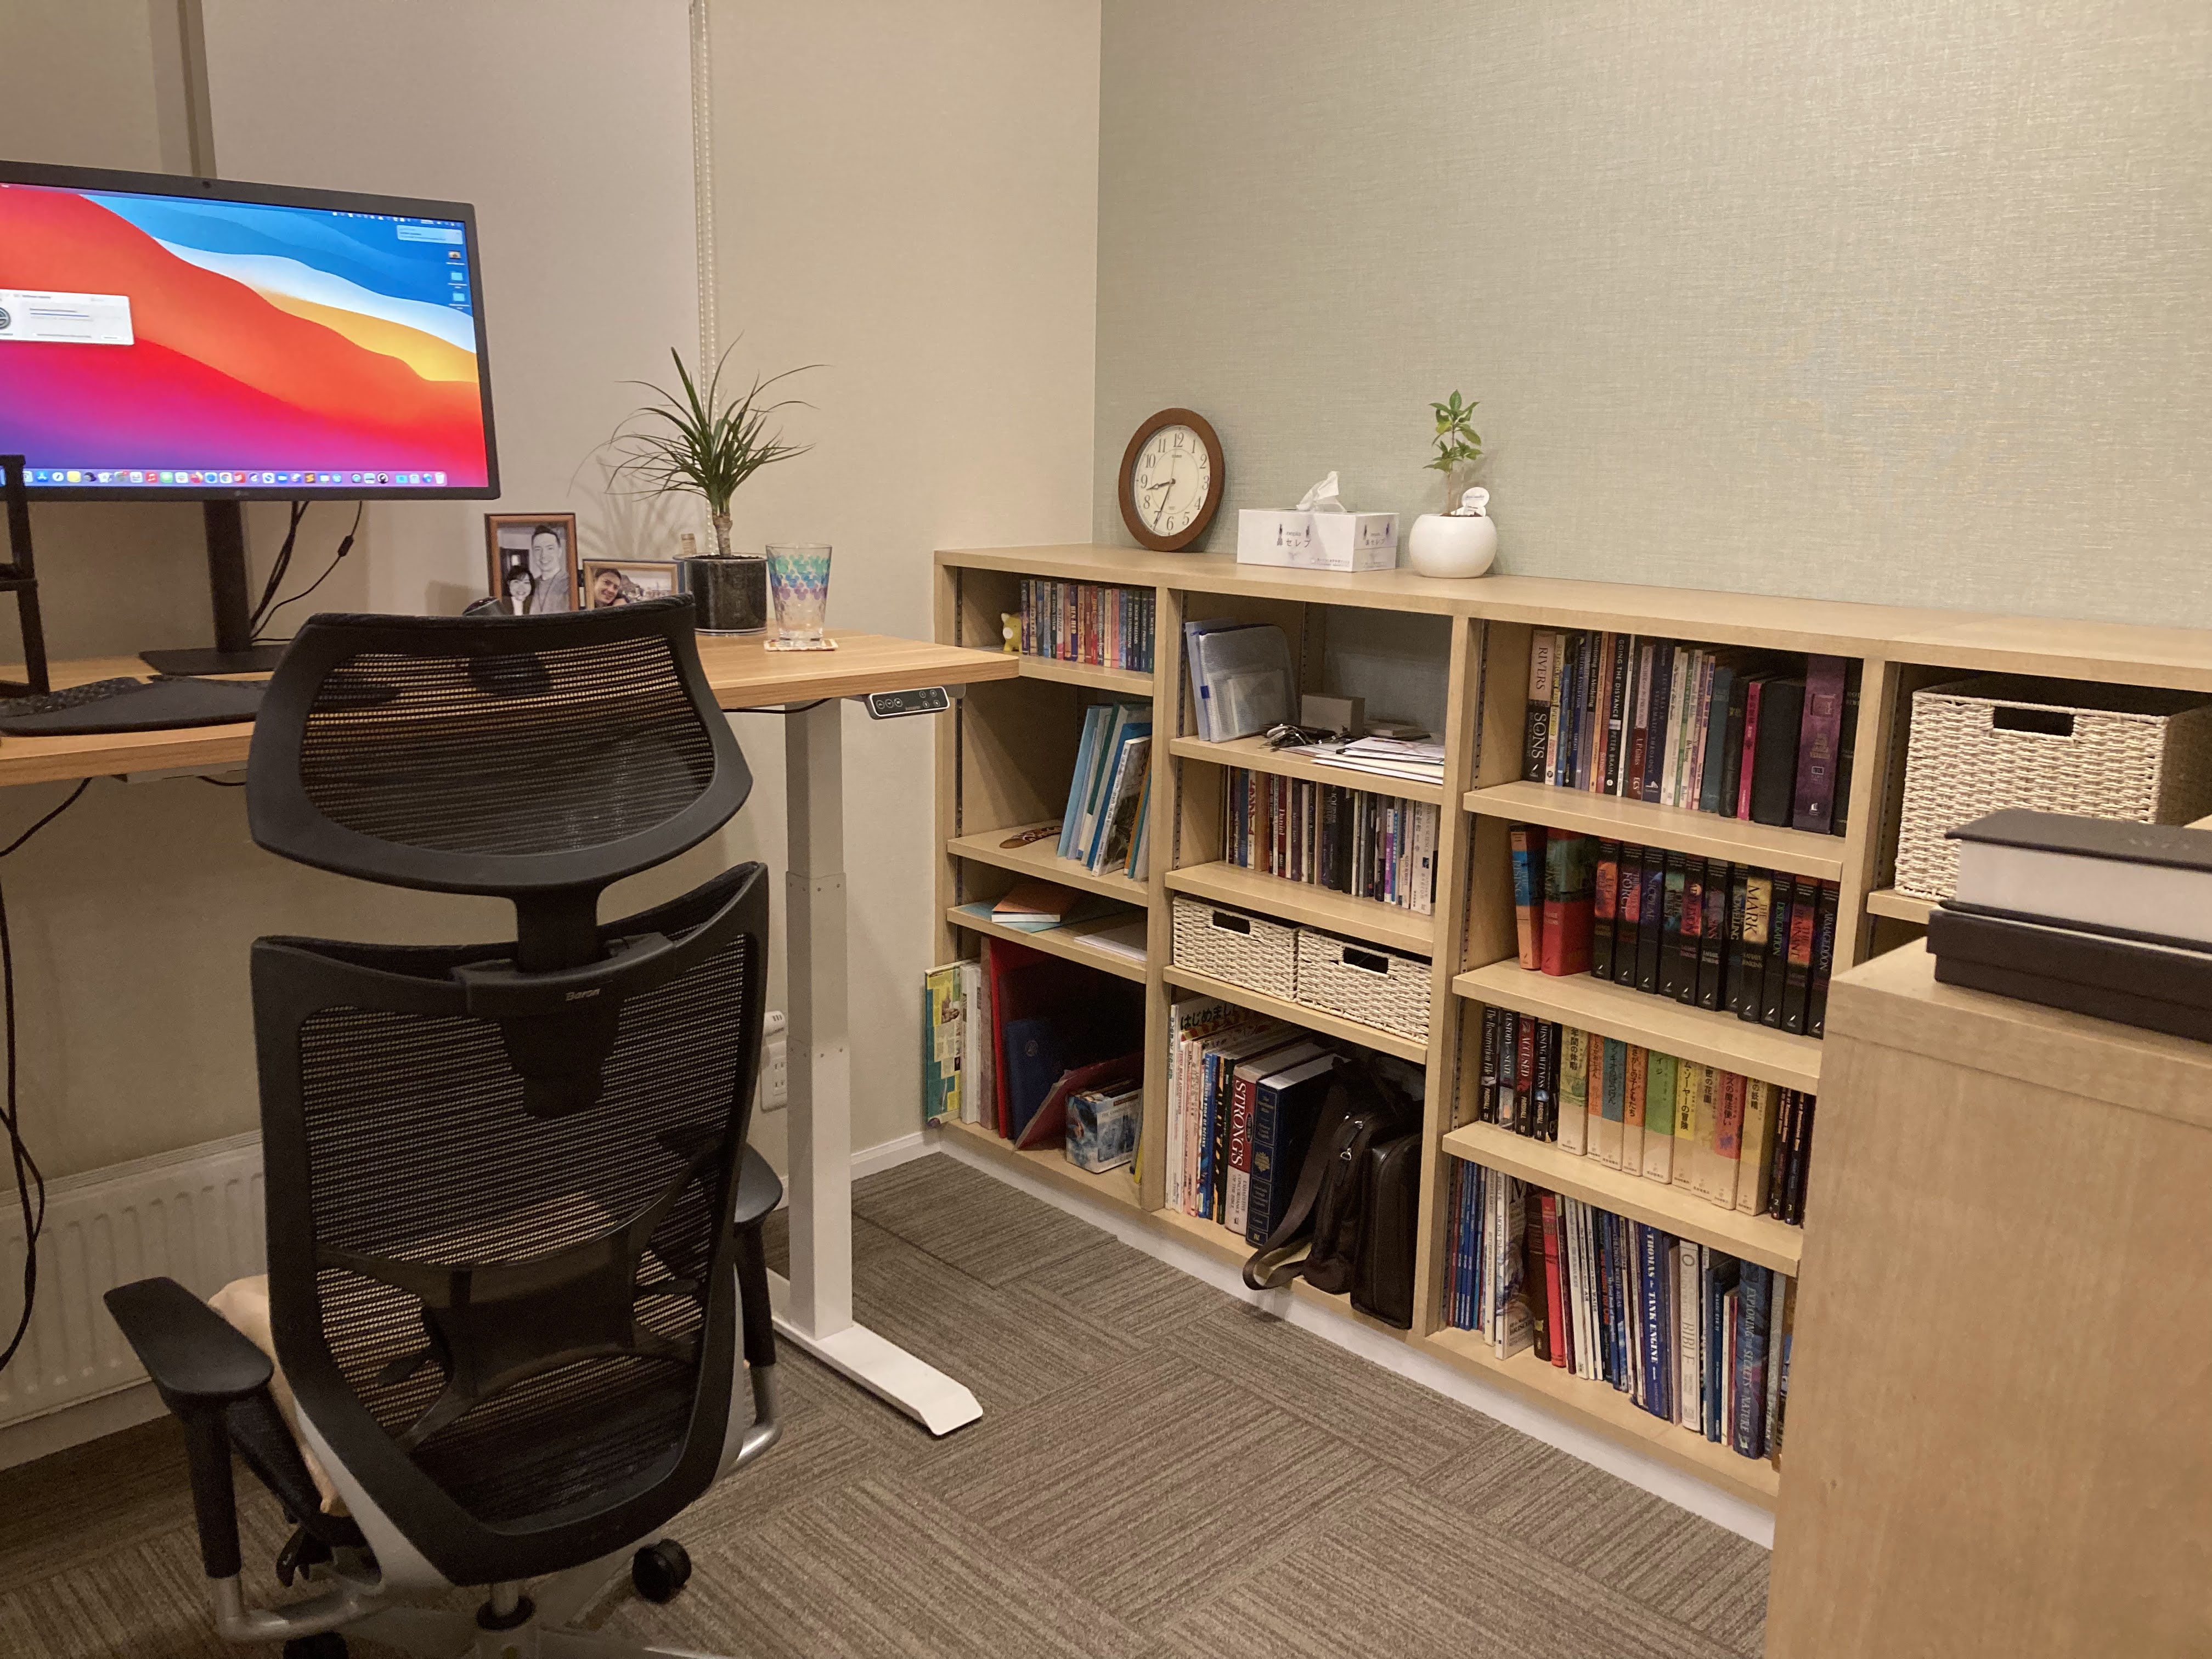 My new home office, with stand-up desk and bookshelves